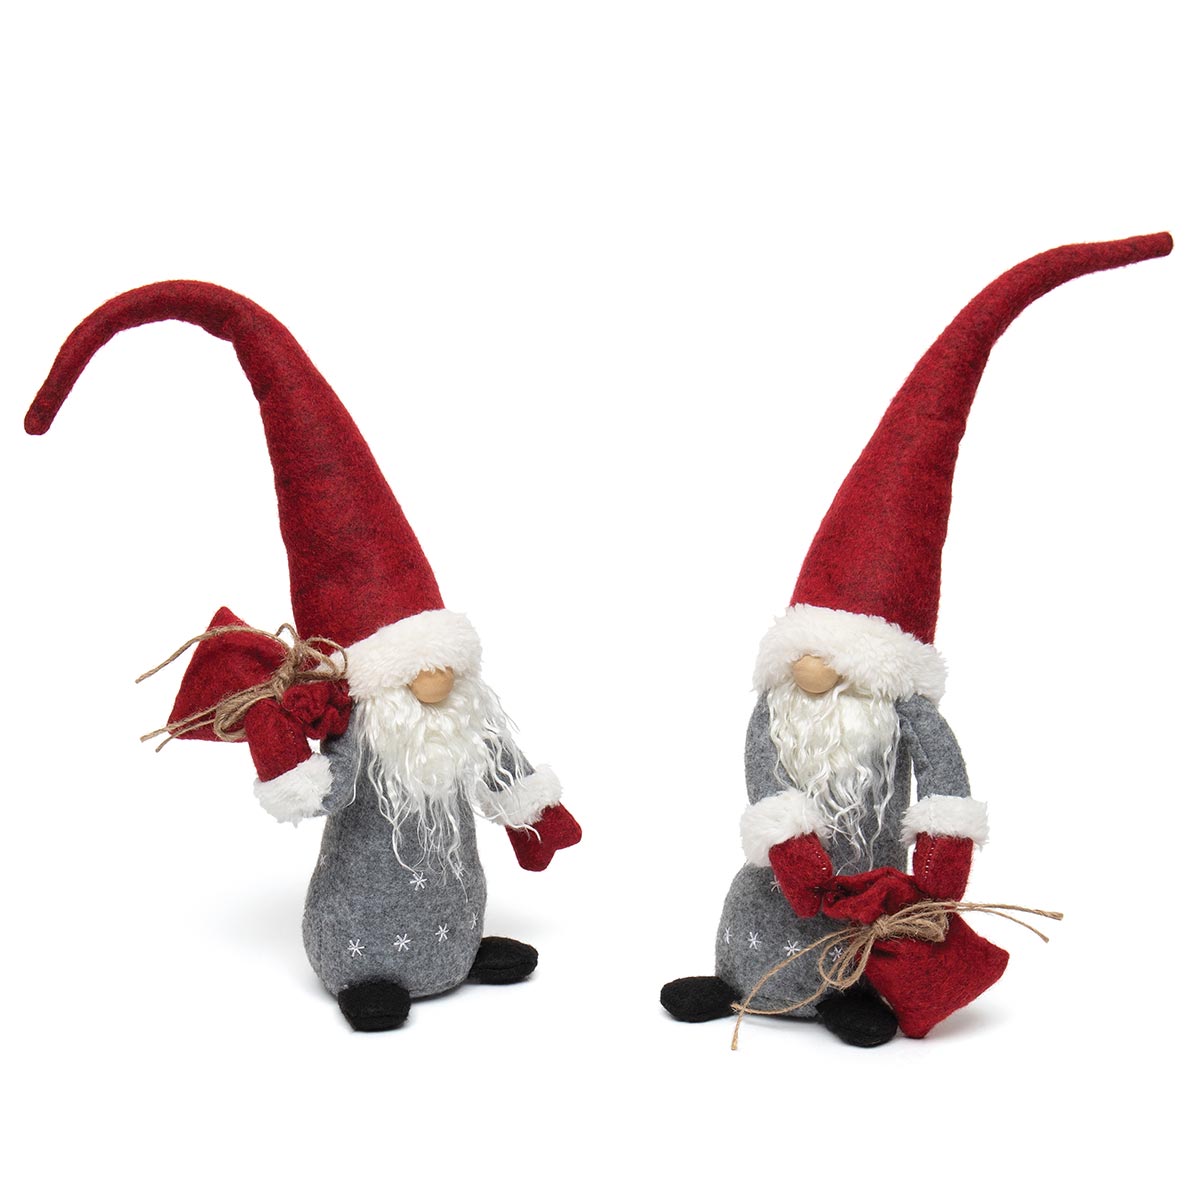 HEAVE AND HO GNOME BURGUNDY/GREY WITH TWINE TIED SACK